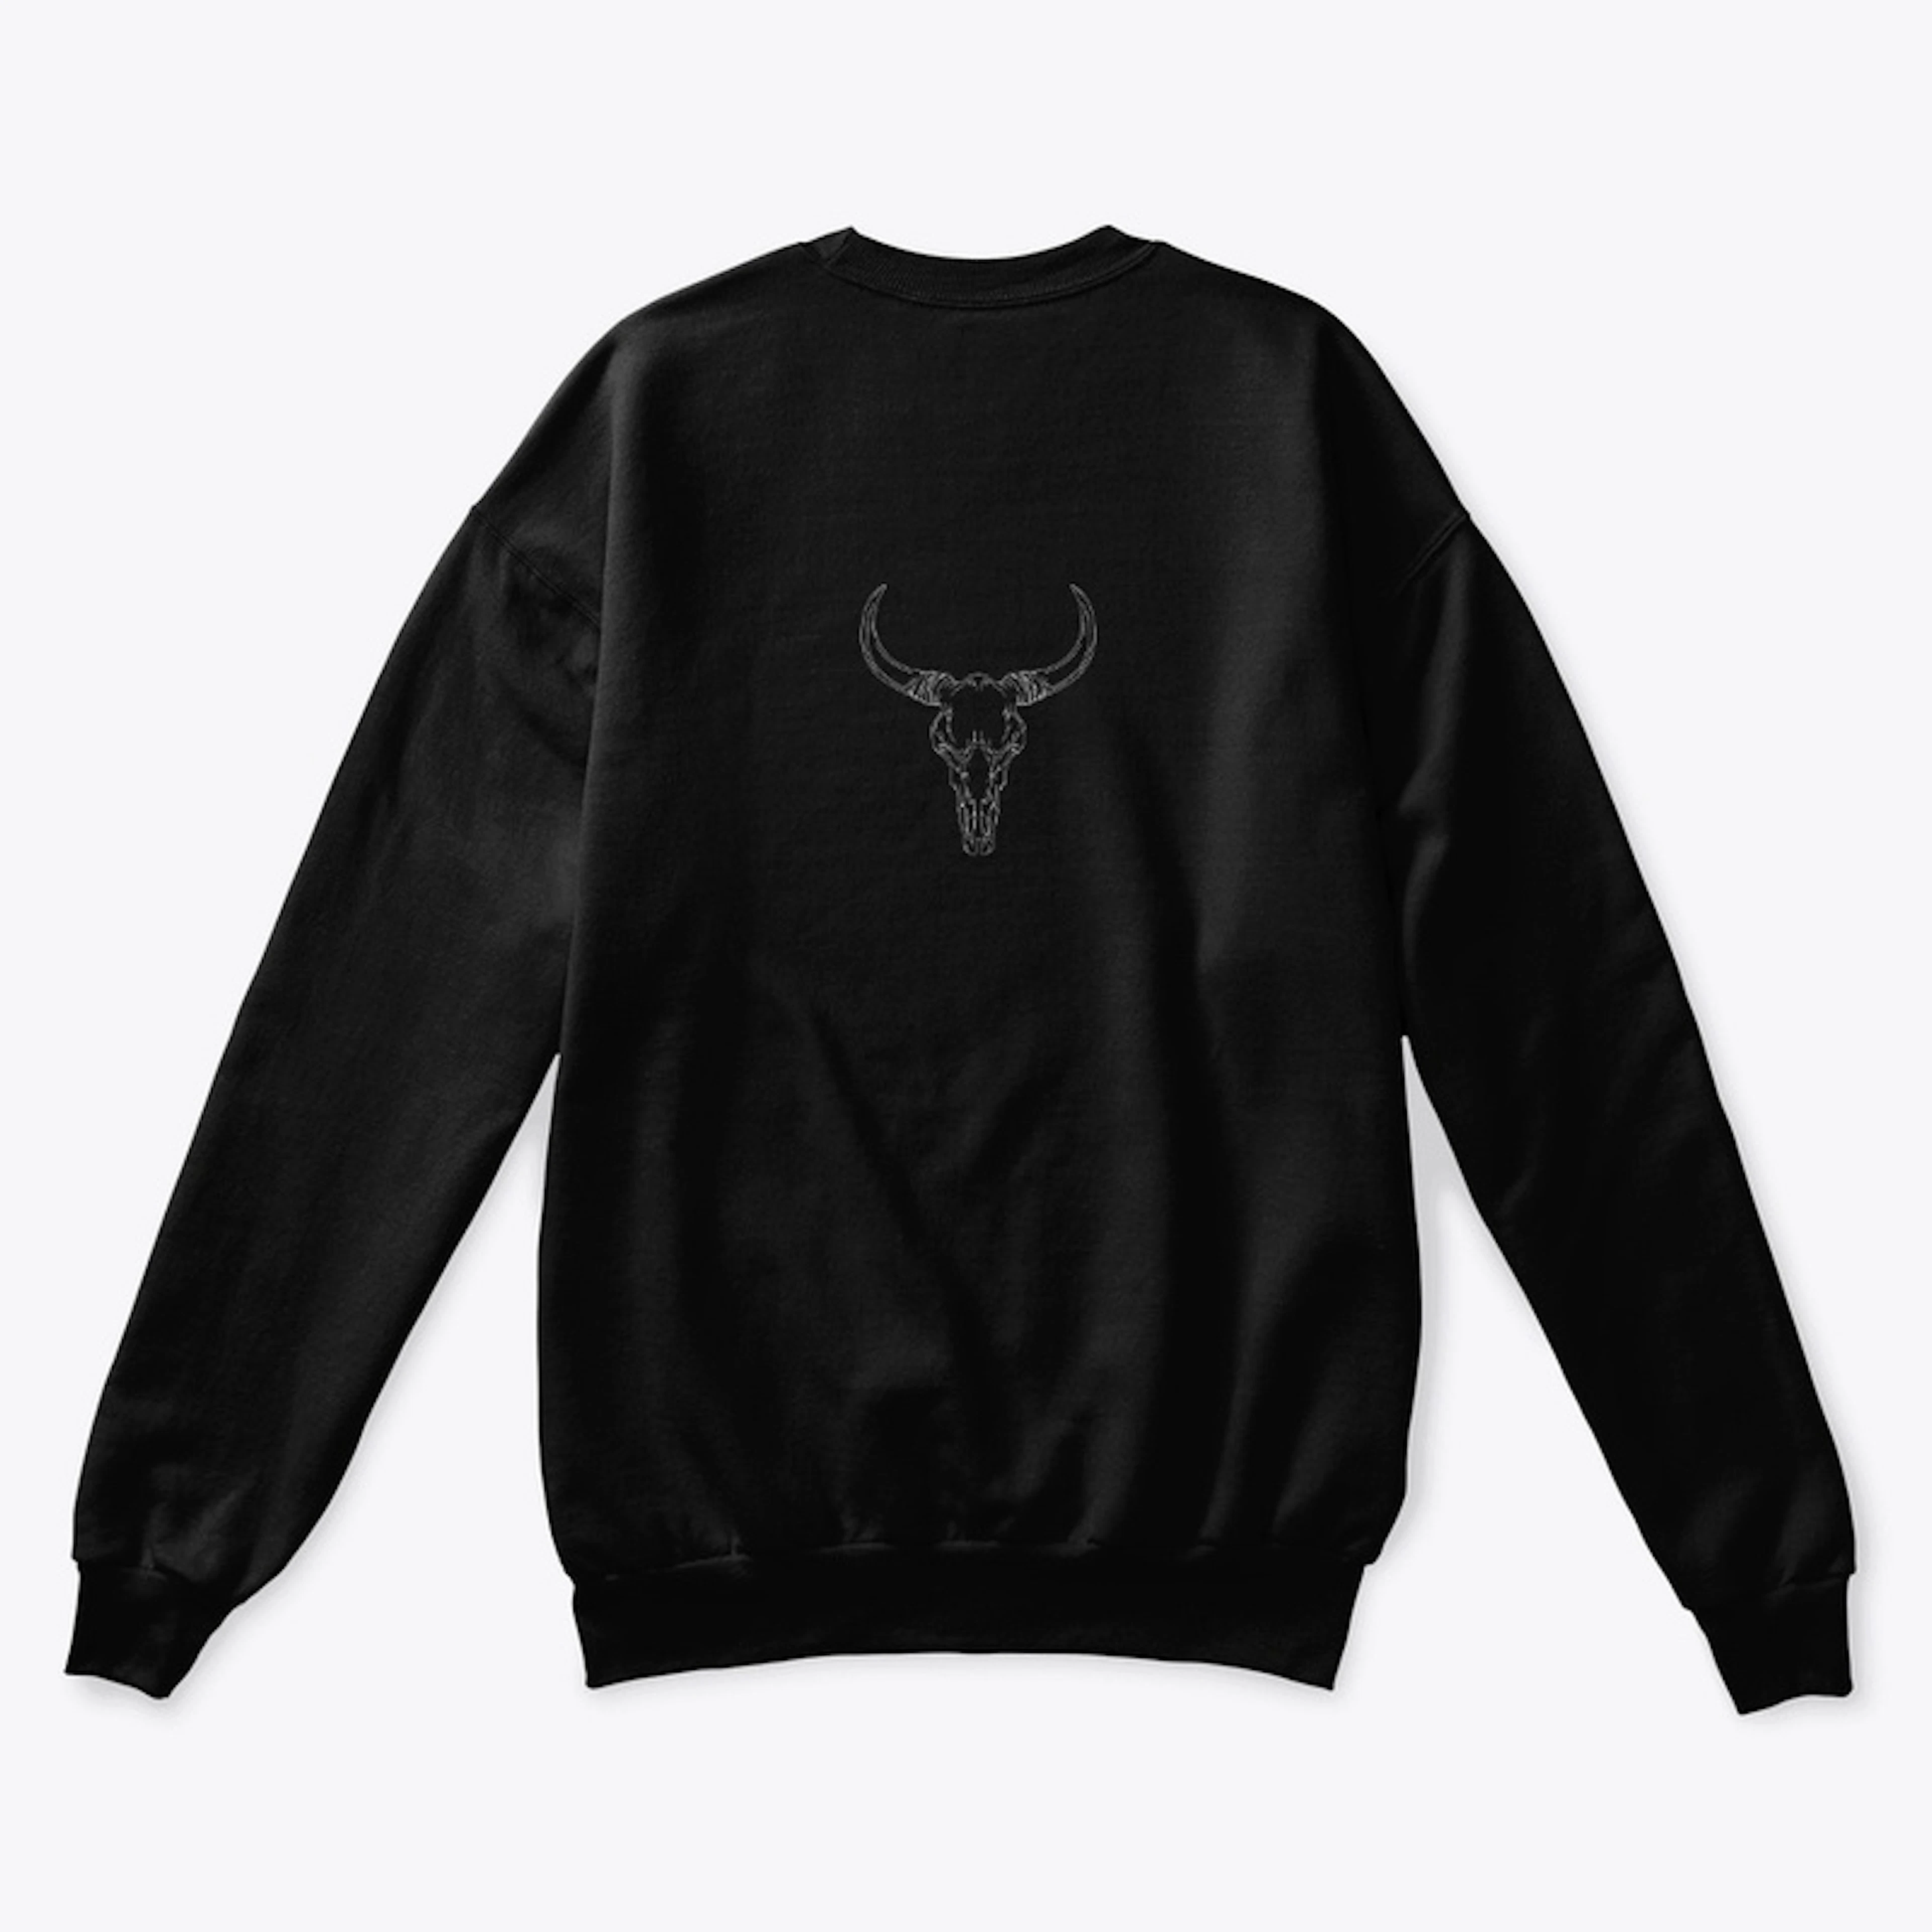 LostTrader "Bull" Collection 